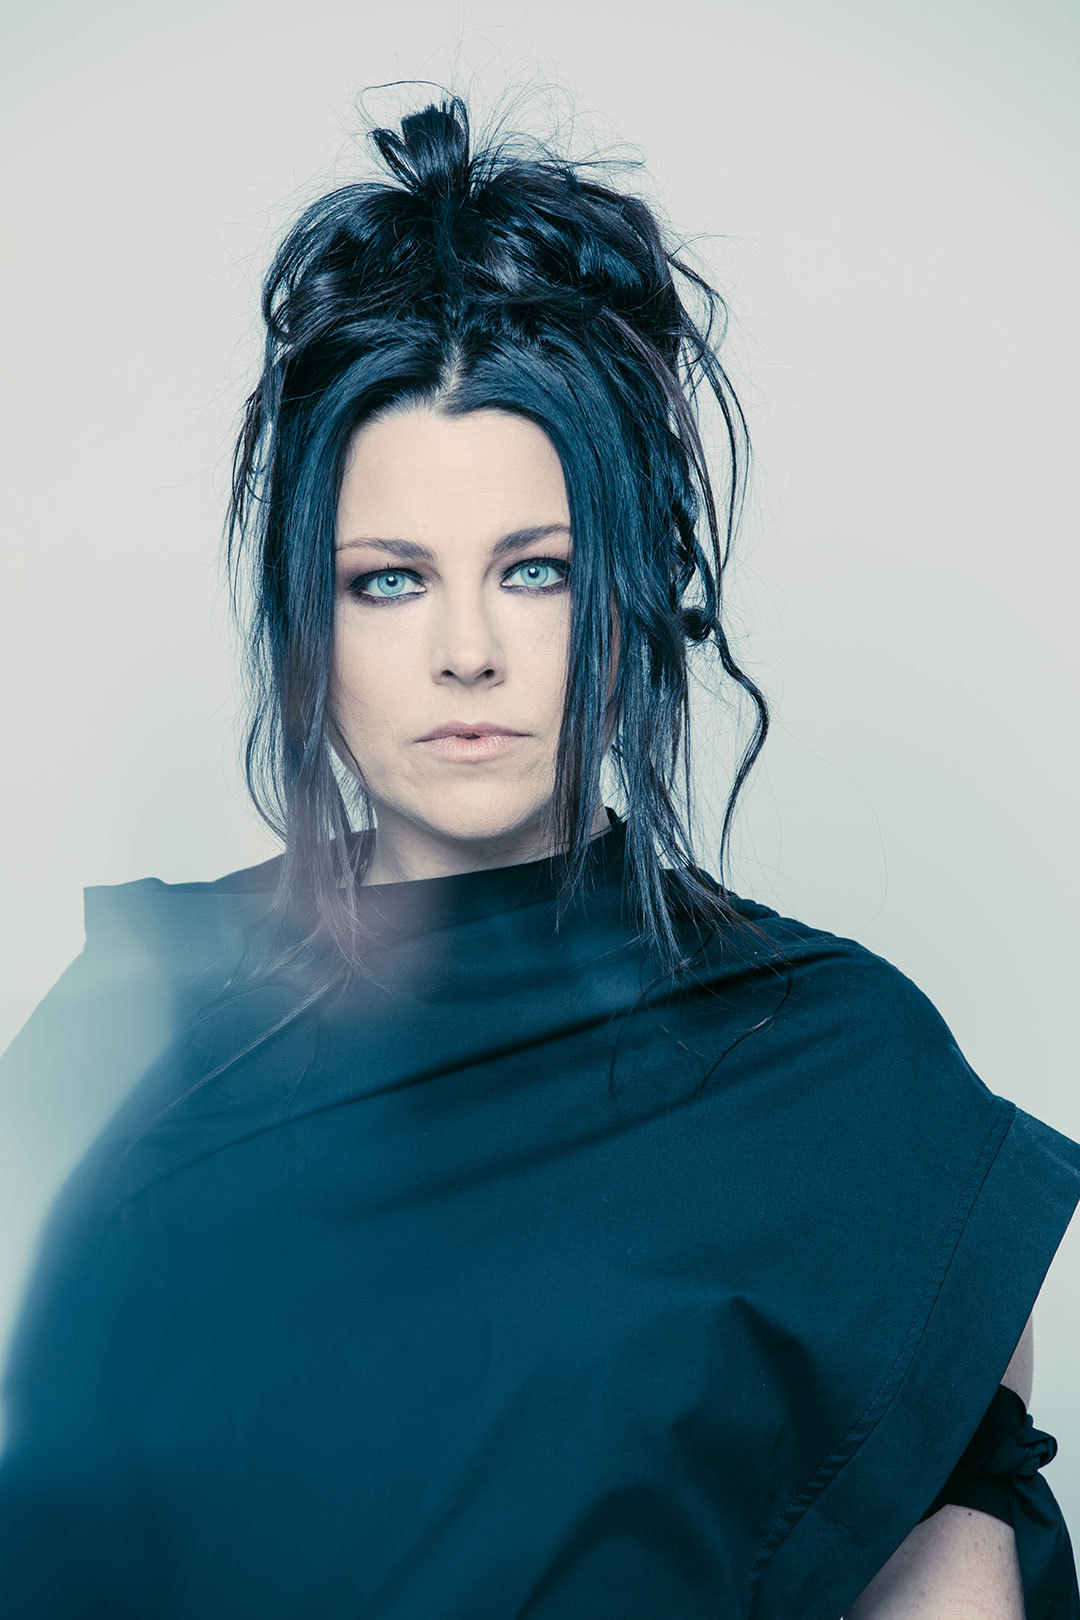 1080x1620
Keywords: amy lee;blue;photoshoot;the bitter truth;sesion;hq